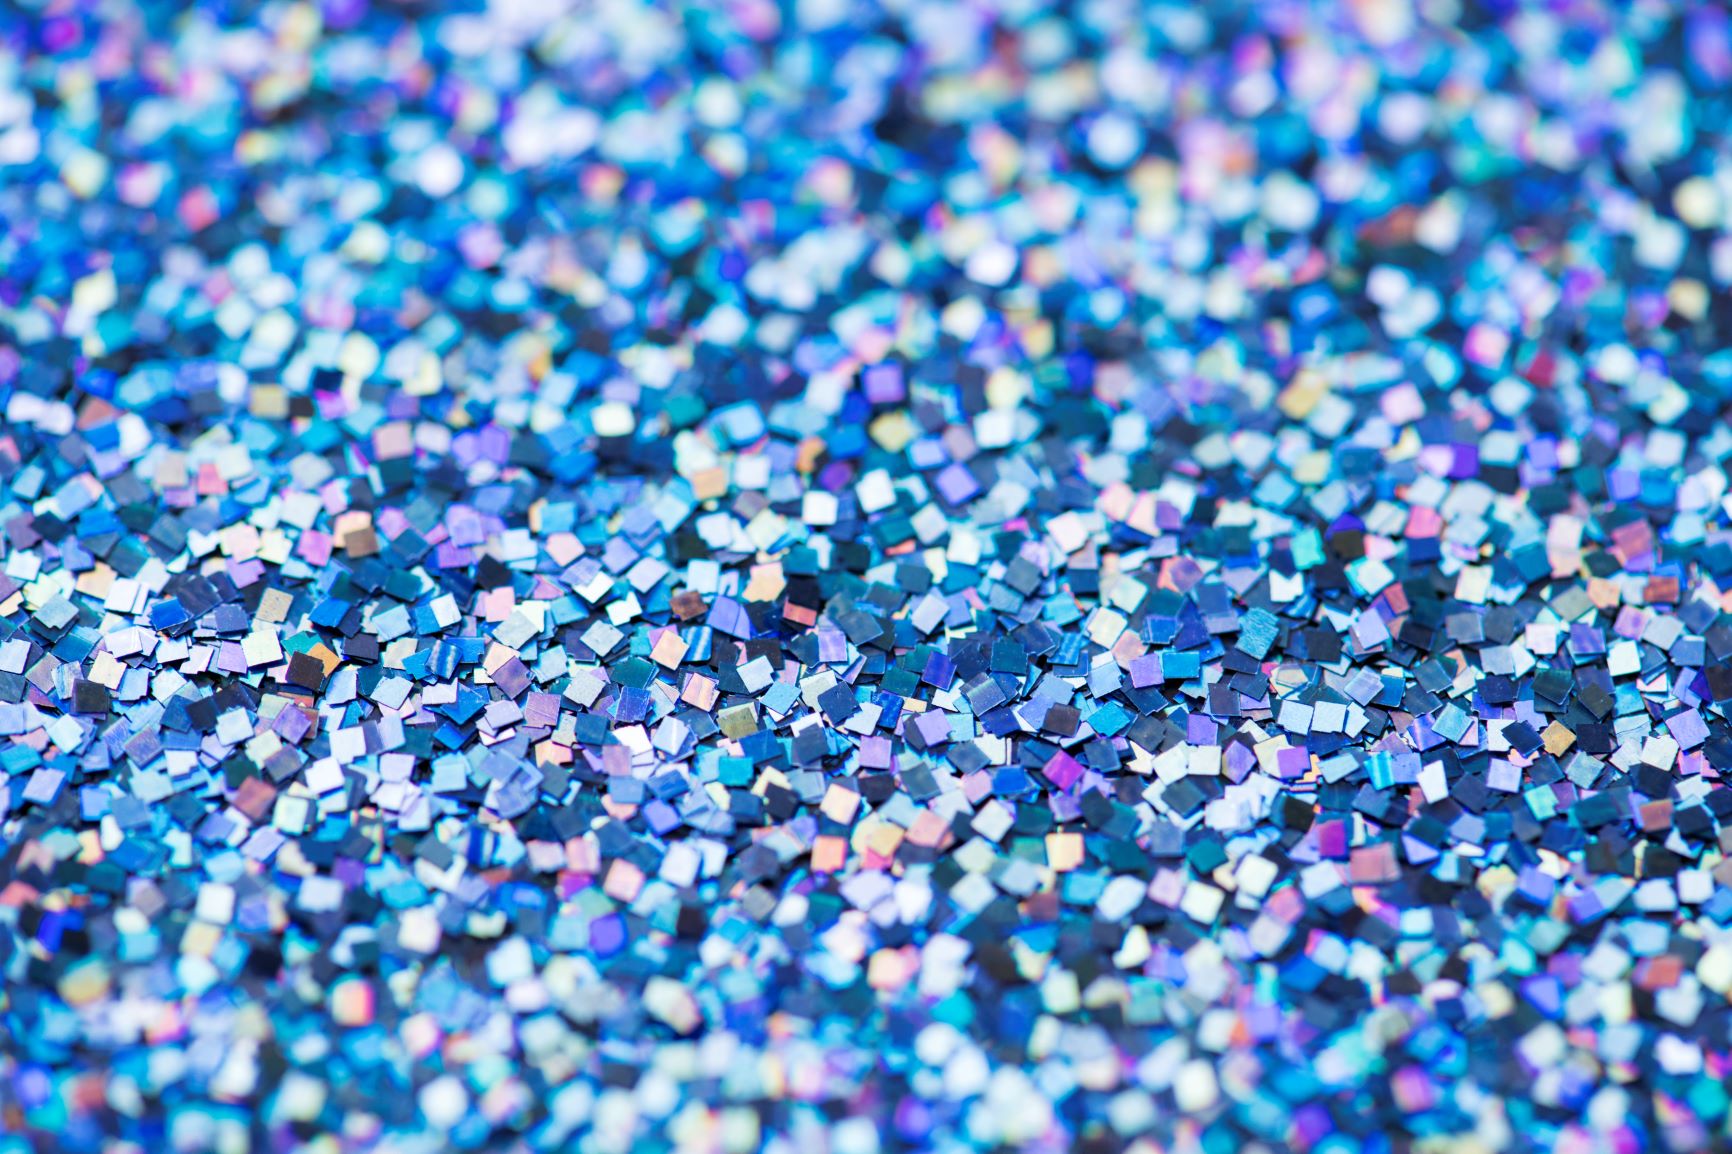 Sequins and glitter of many different shades of blue scattered on a surface.